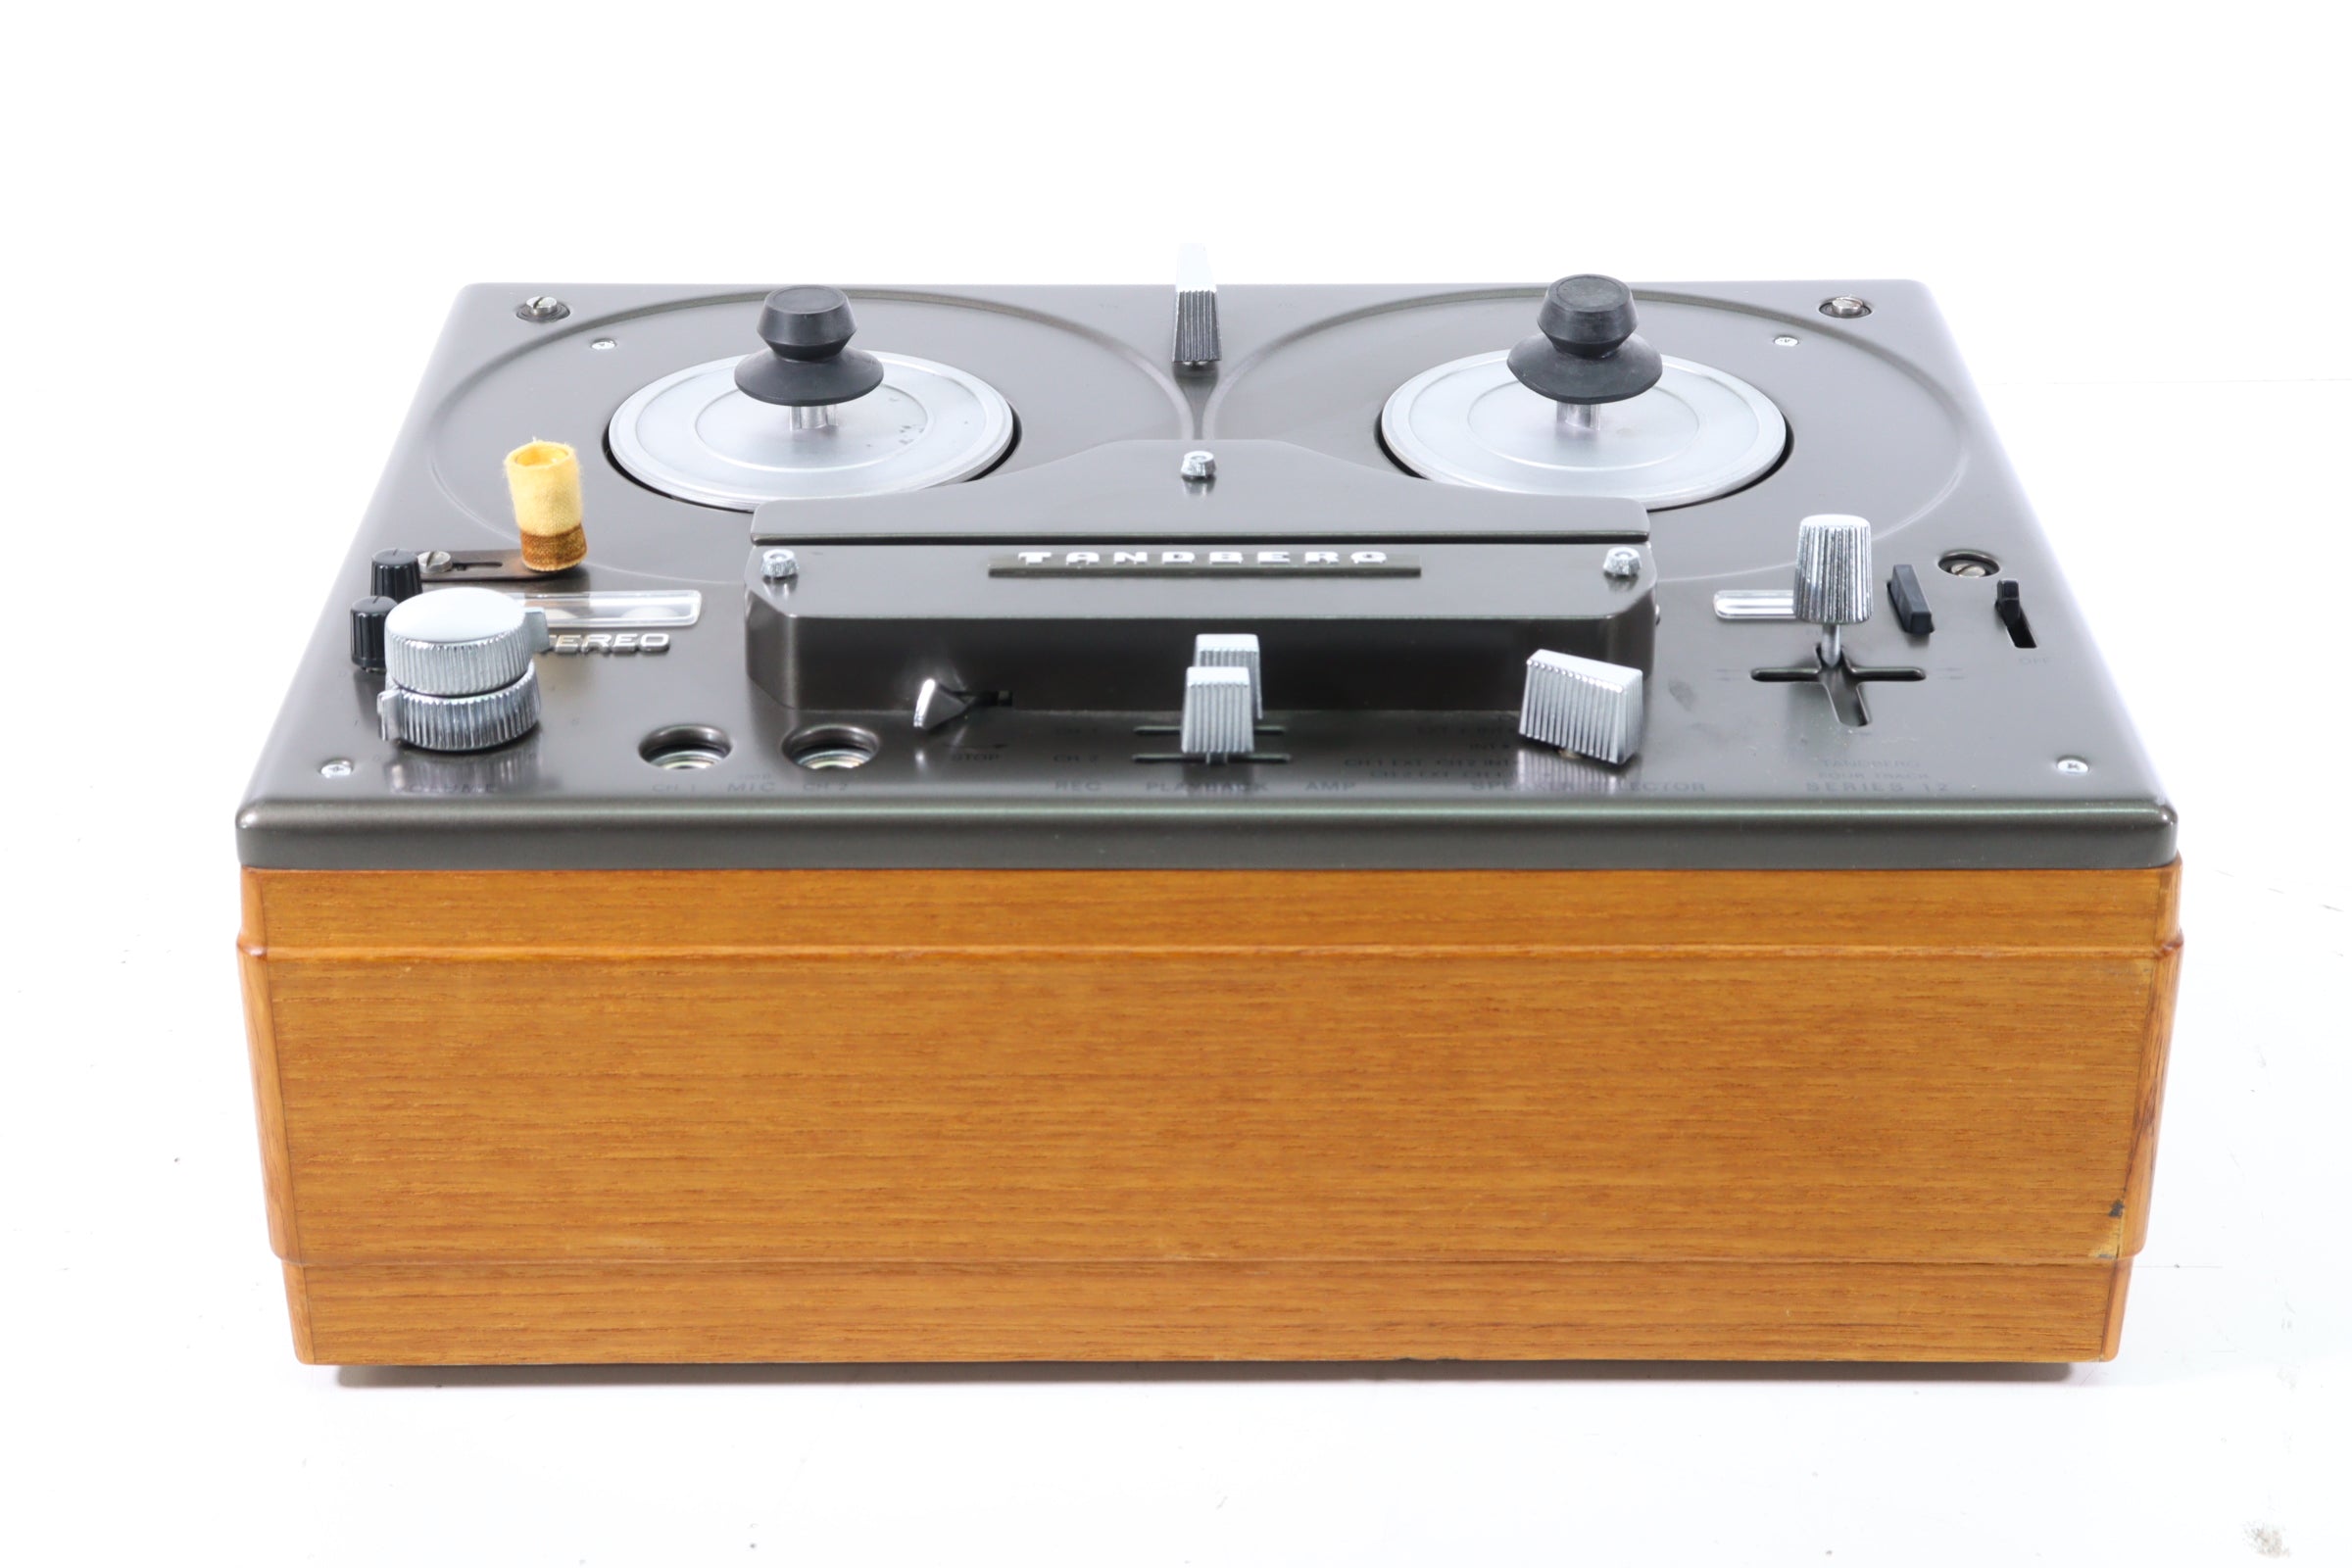 Challenger Reel to Reel Recording Tape 12A 1200 Ft. 